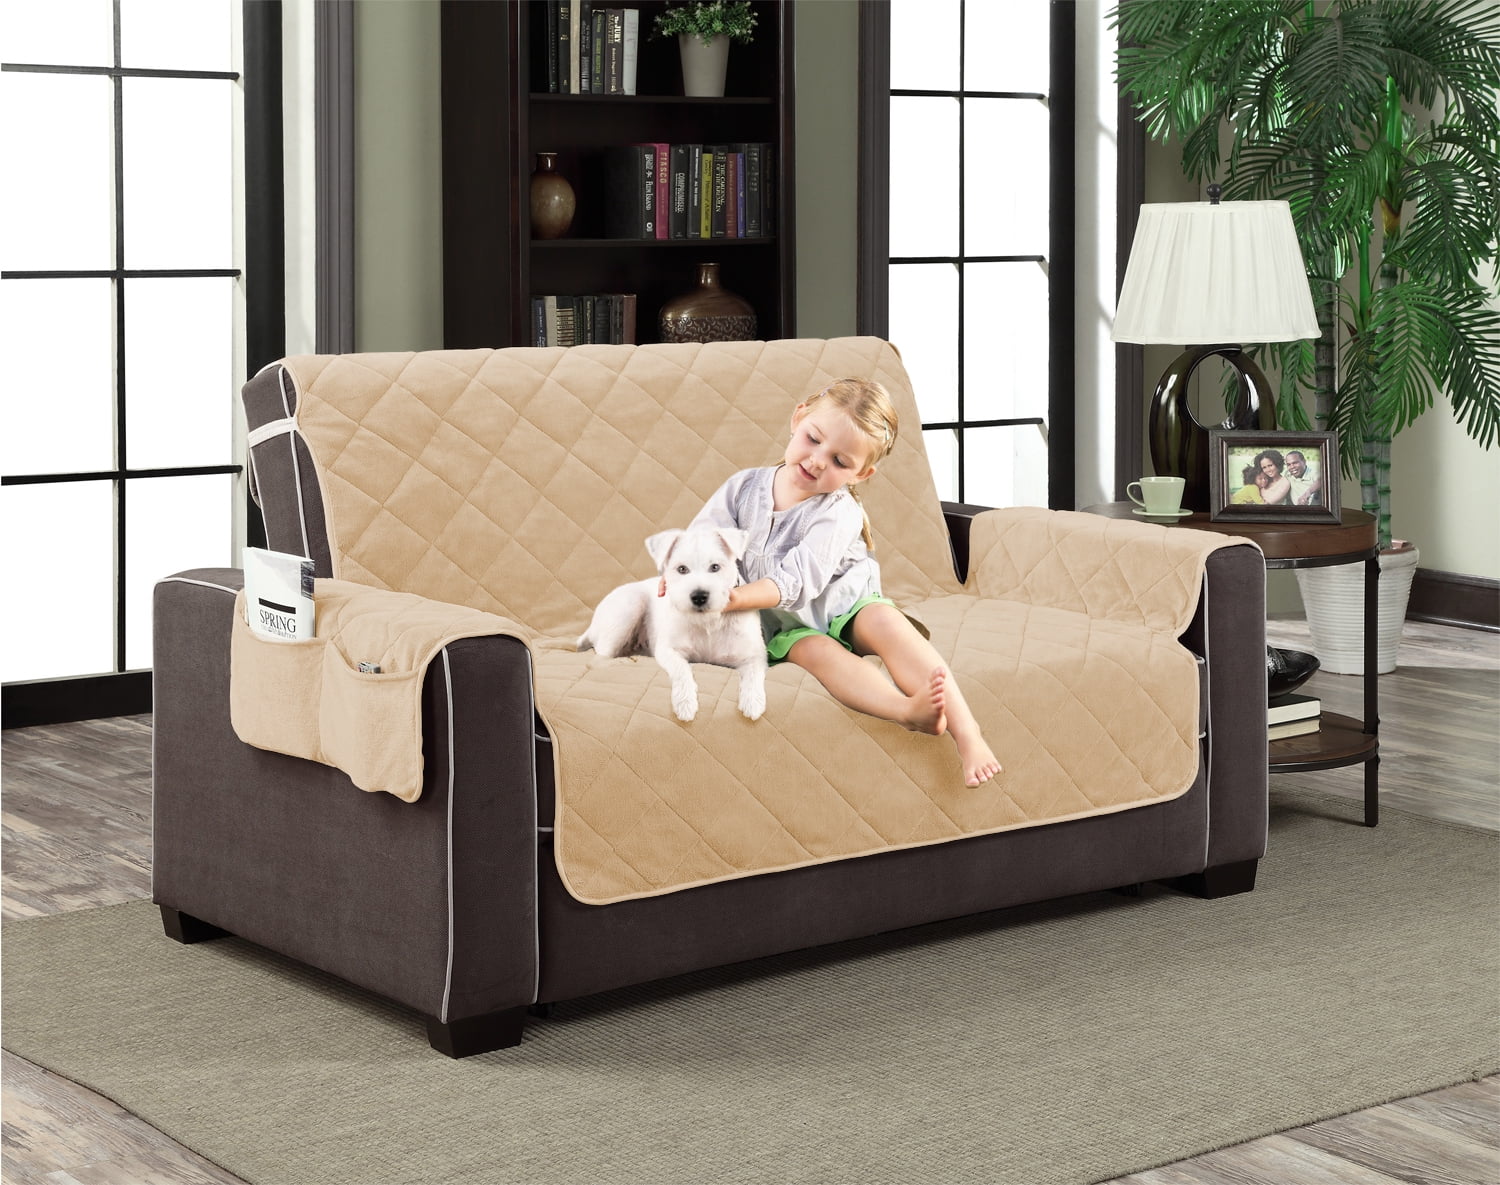 Brown Microfiber Slipcover Pet Dog Reversible Furniture Couch Protector Pockets 